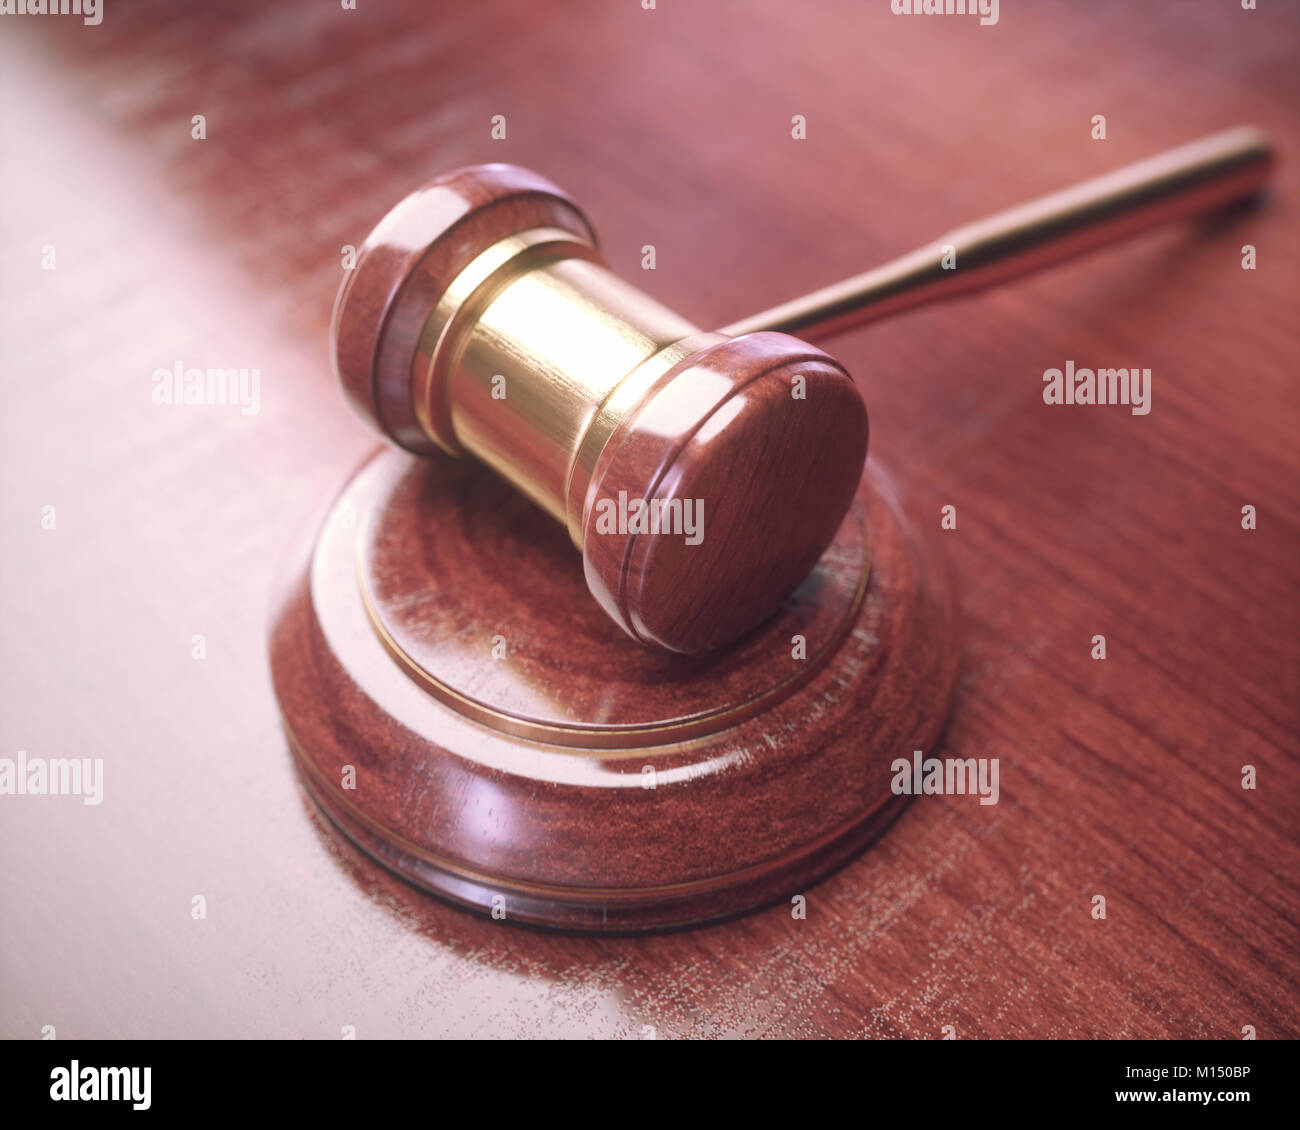 Gavel, judge hammer. Close up of wooden hammer with gold details. Concepts of law and auction. Stock Photo